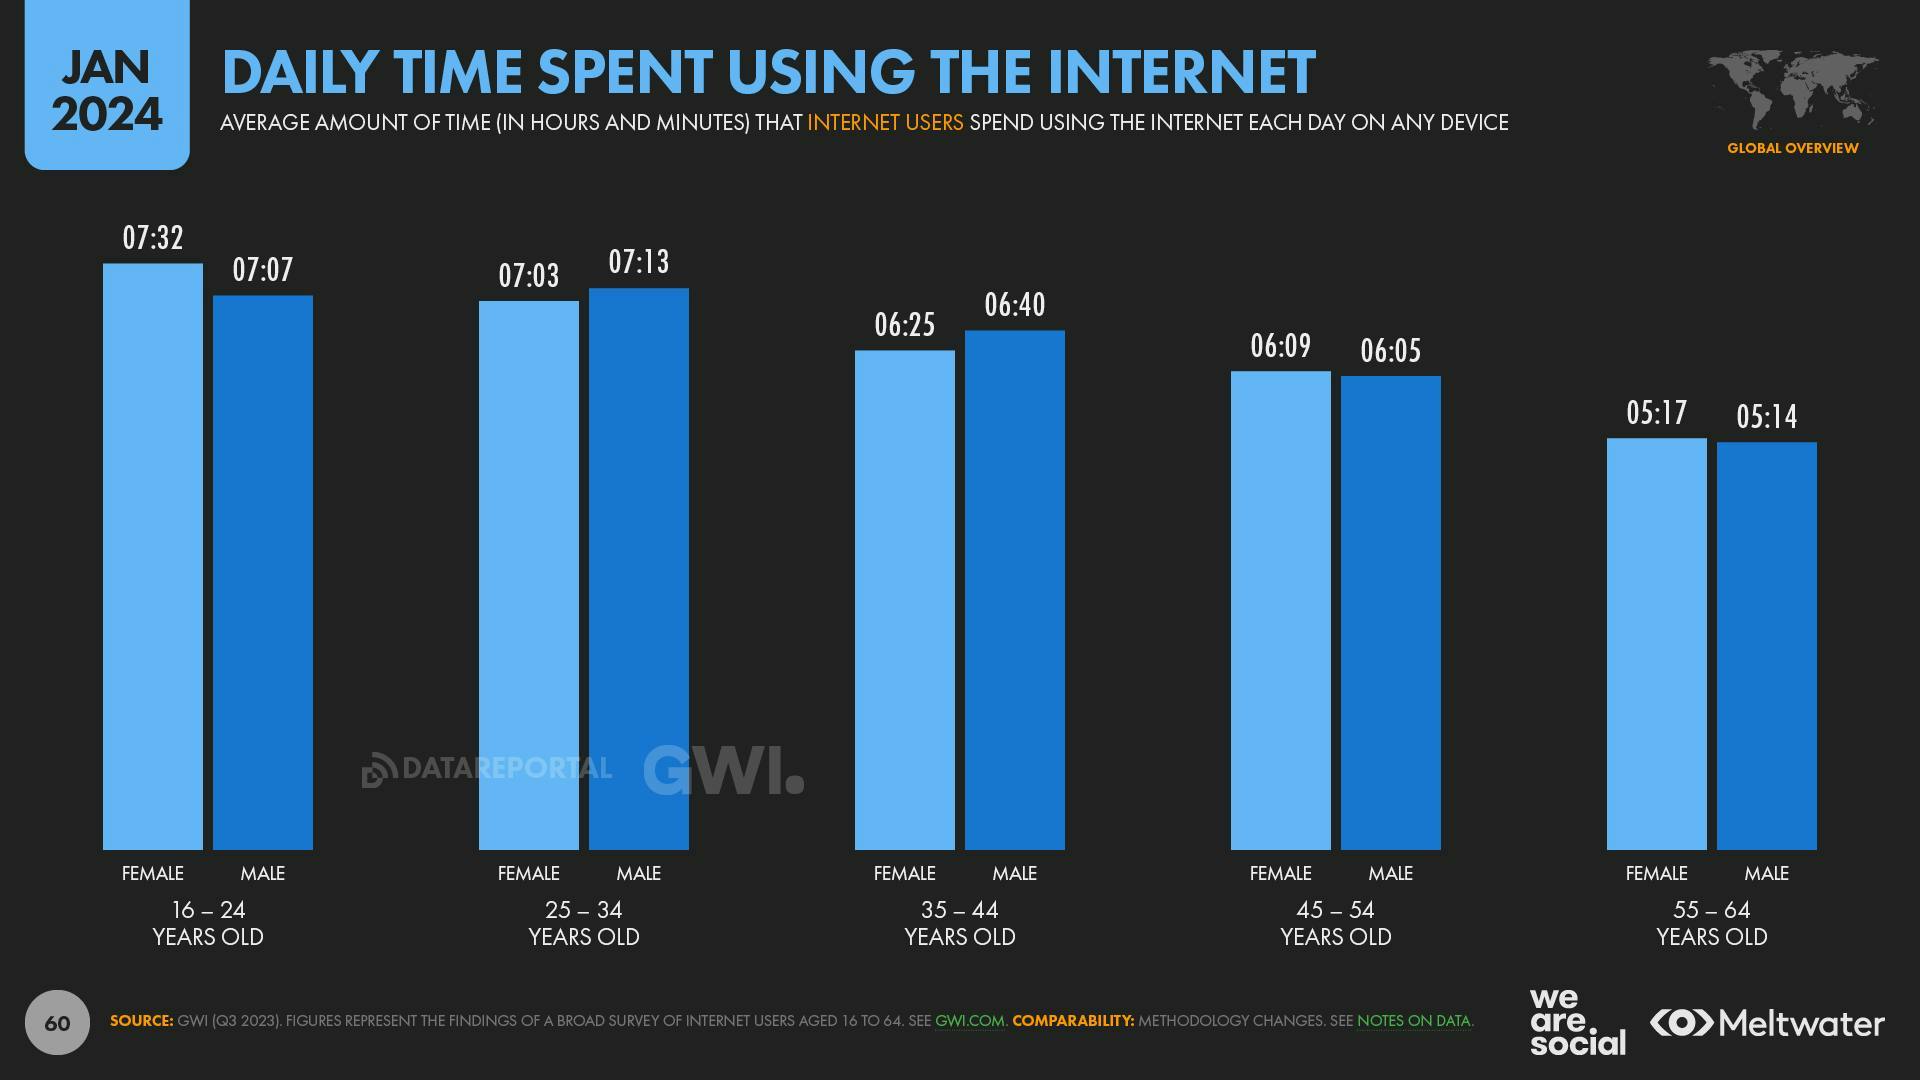 Daily time spent using the internet by age group